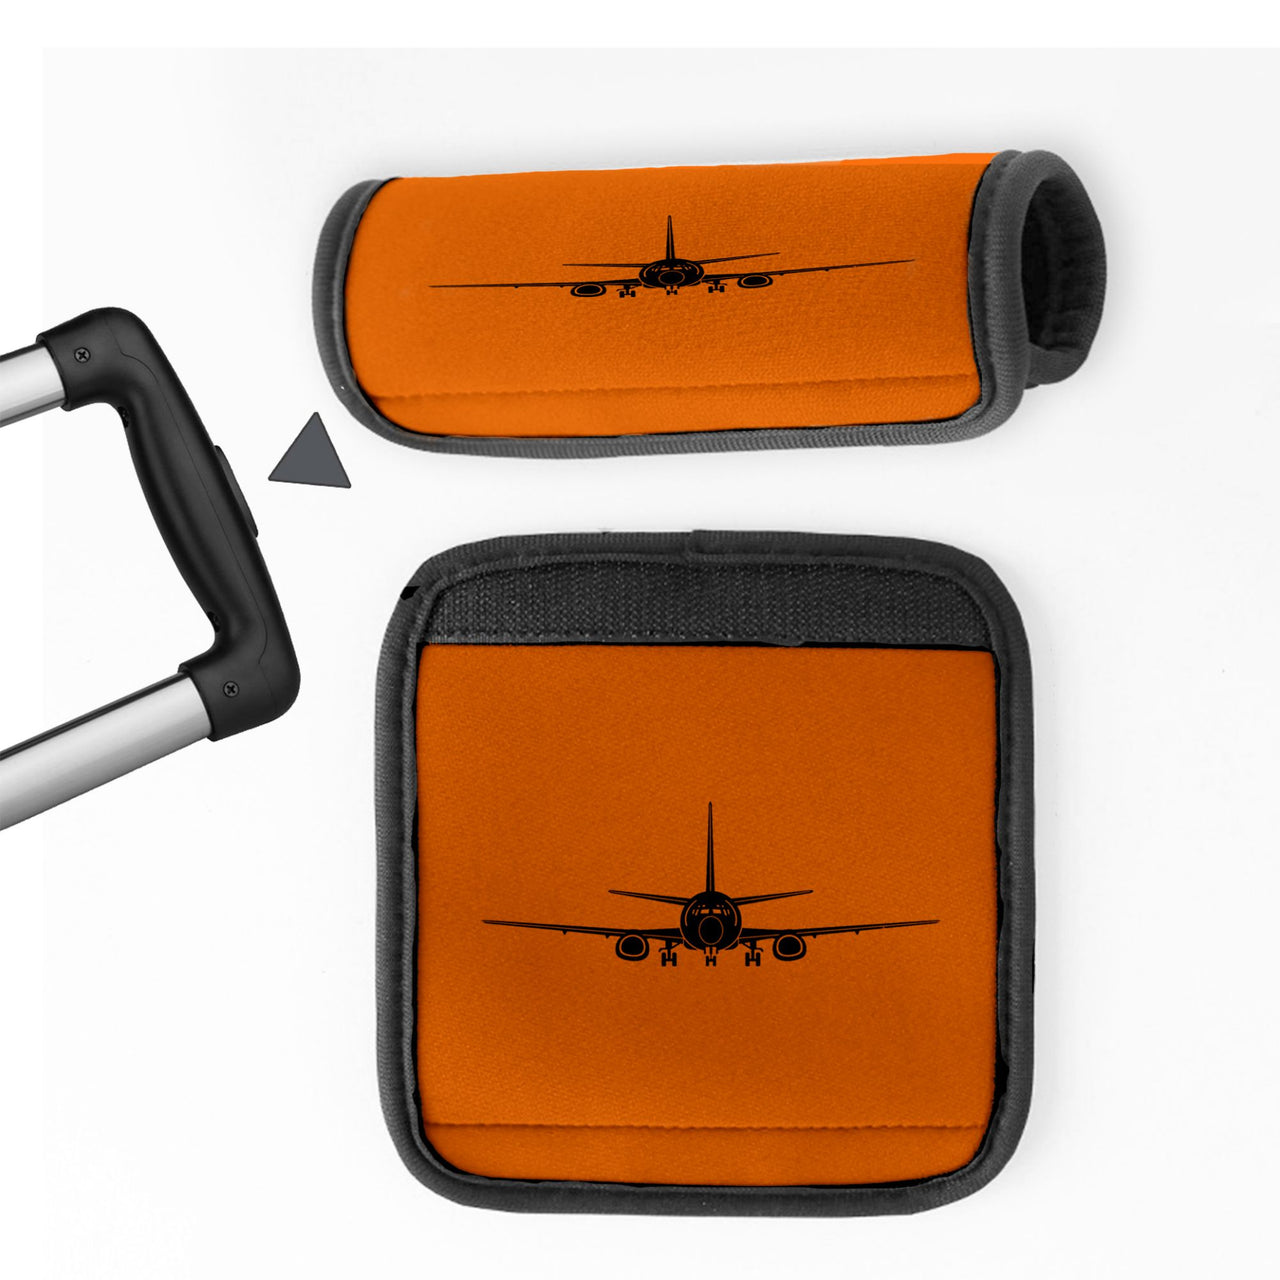 Boeing 737 Silhouette Designed Neoprene Luggage Handle Covers